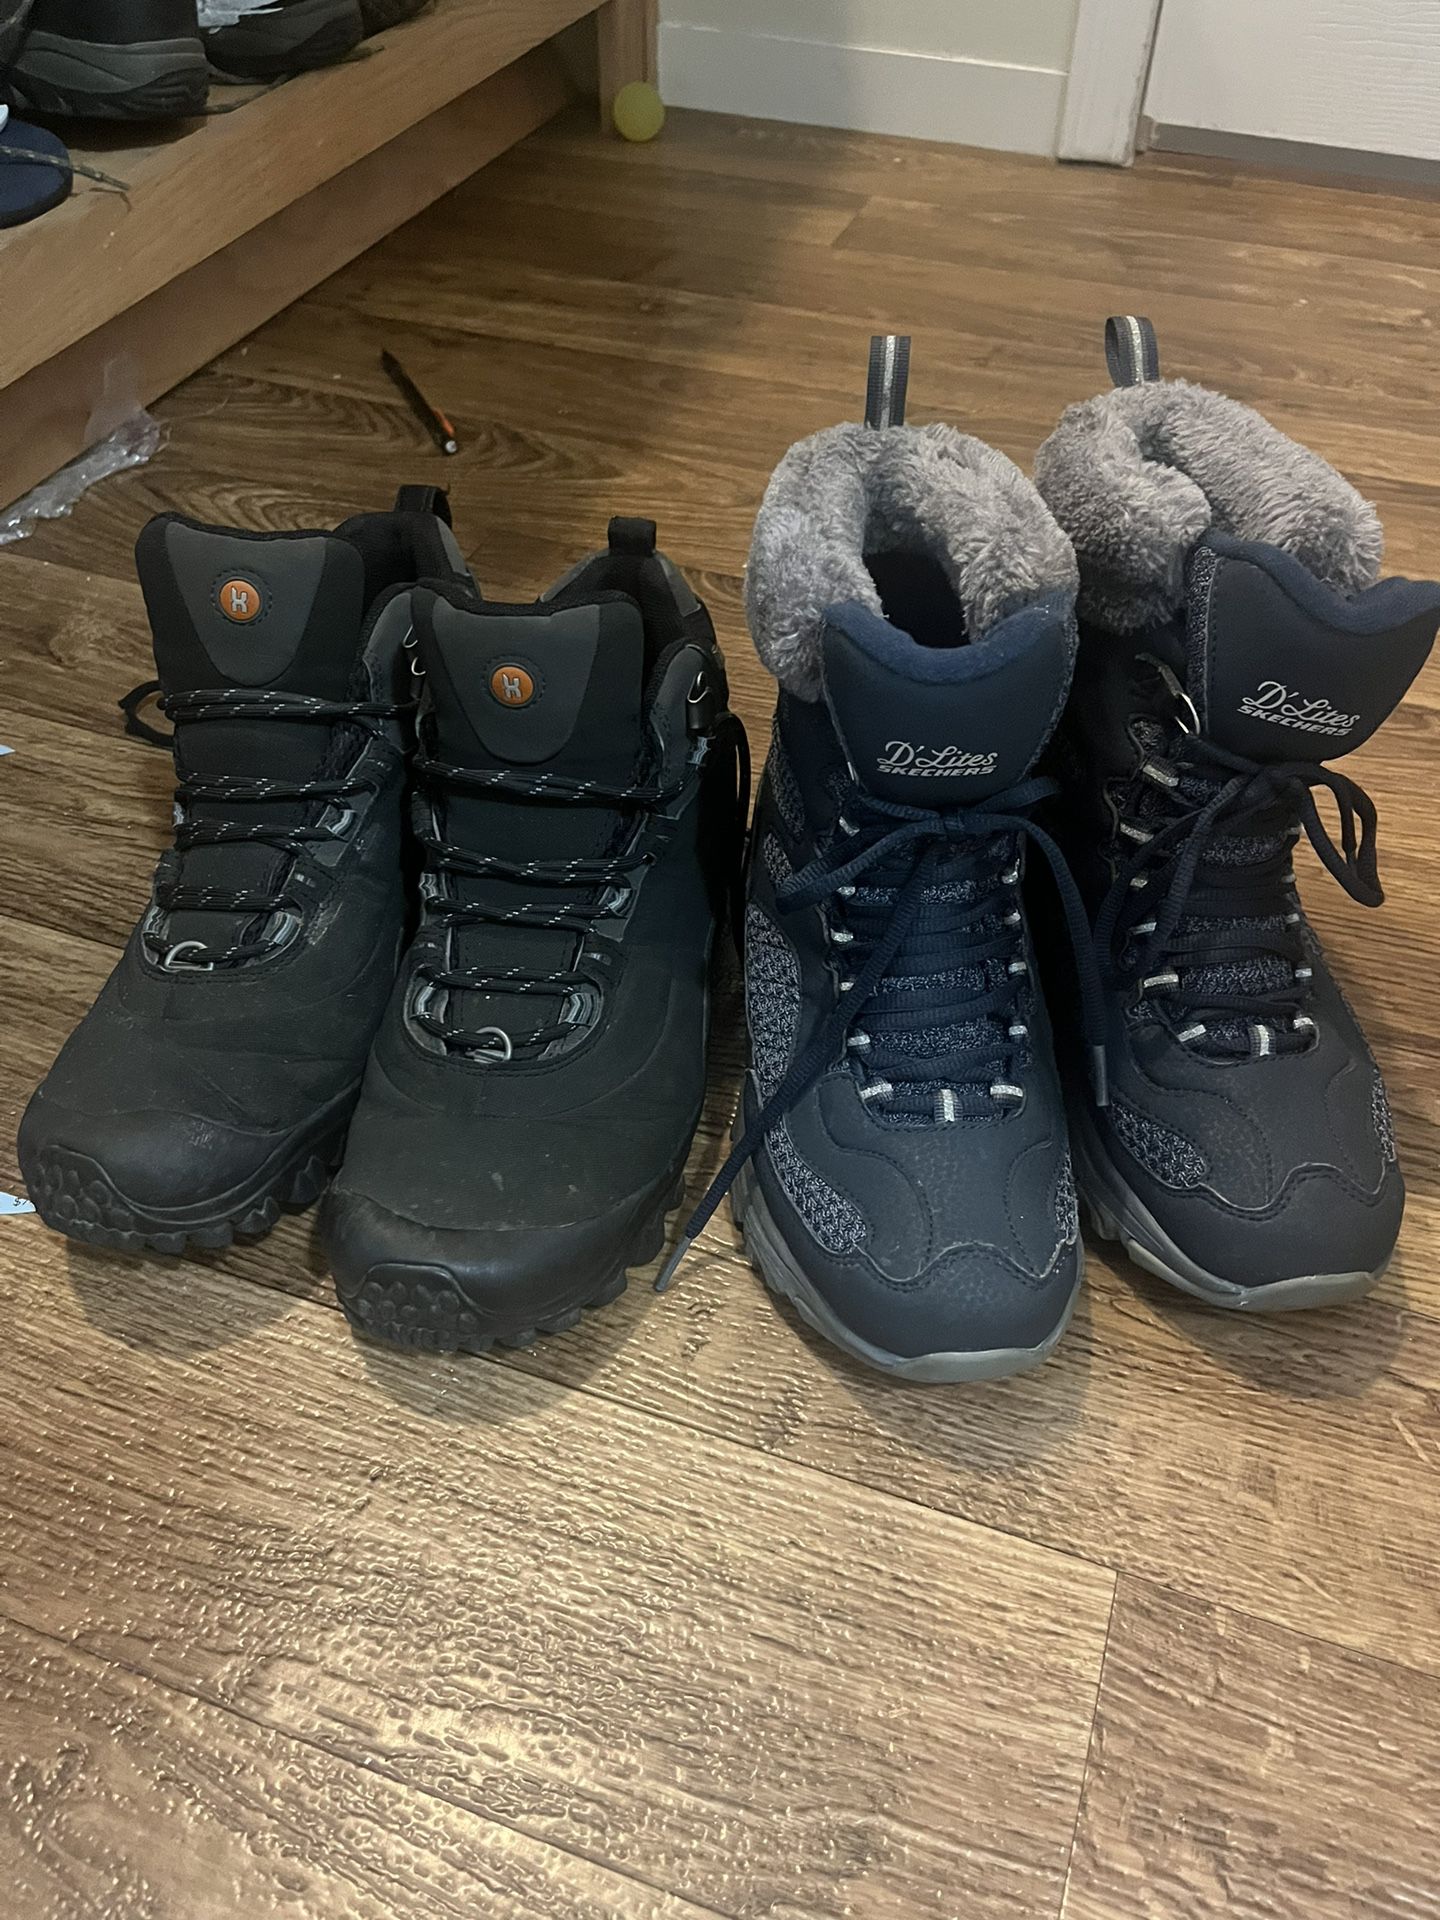 Two Pair Of Boots 